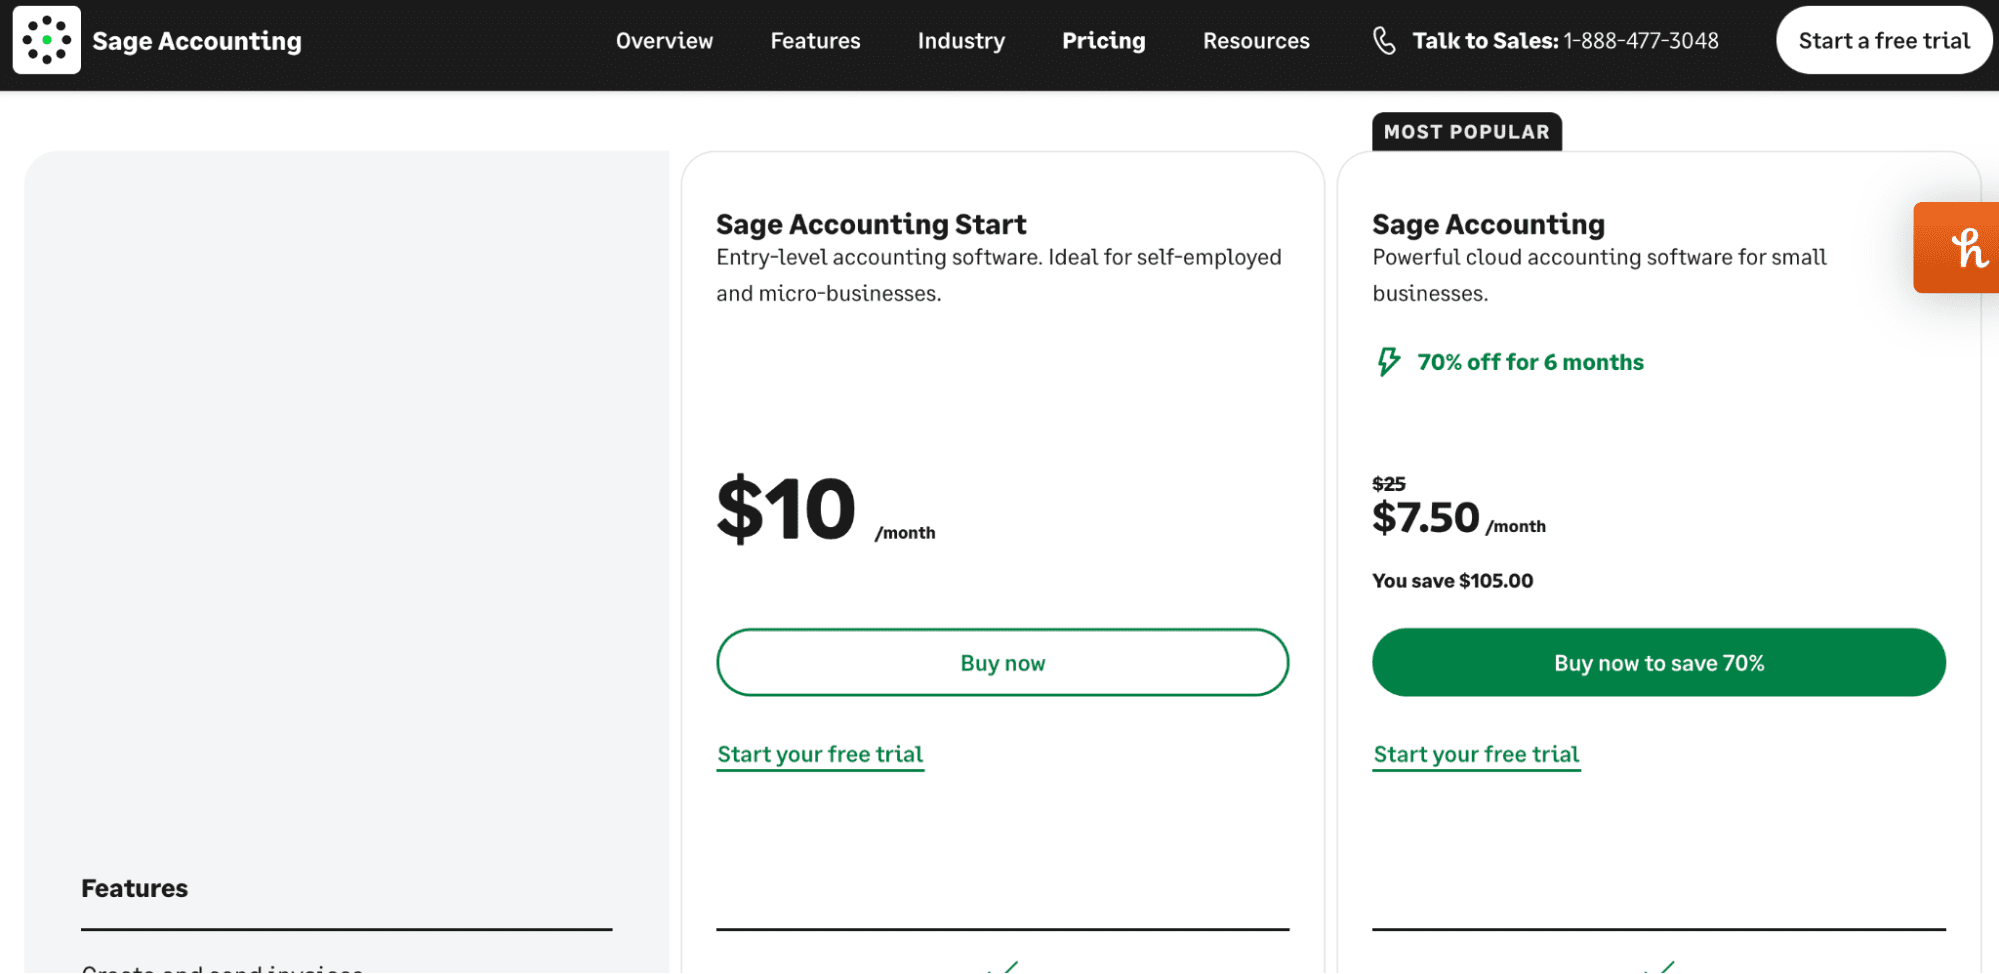 The pricing page for Sage